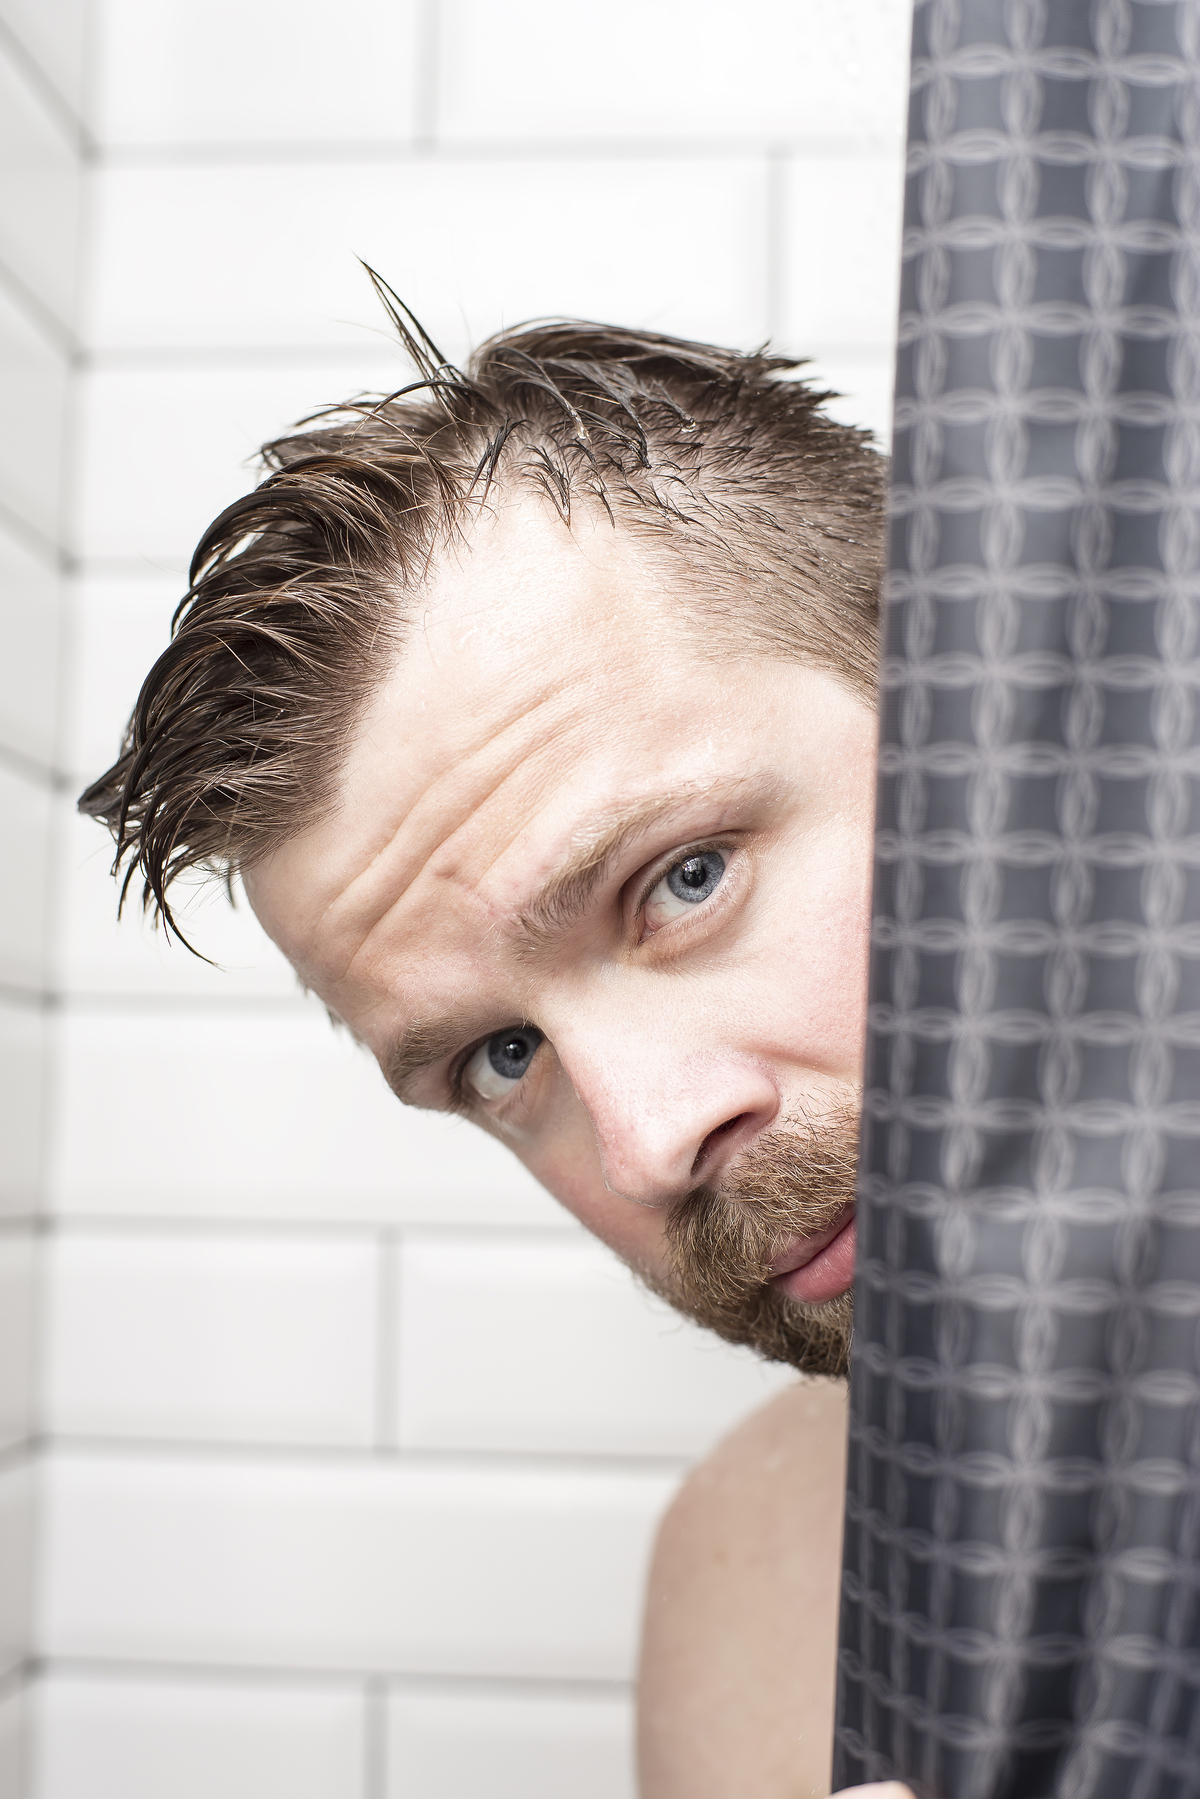 Man peeking out from behind a shower curtain.